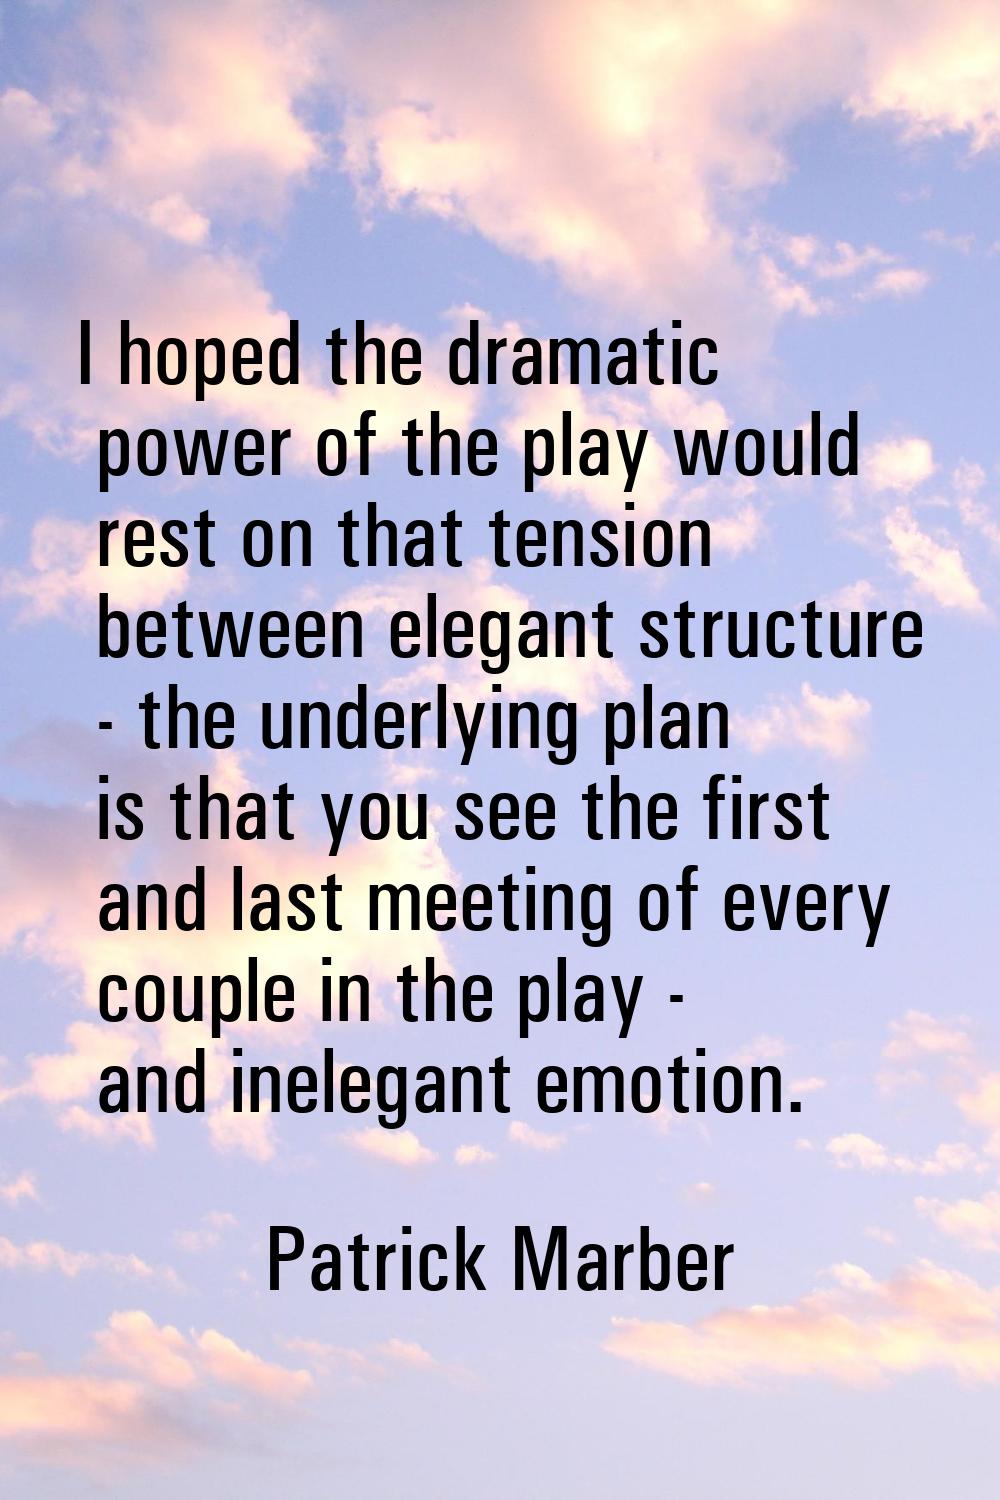 I hoped the dramatic power of the play would rest on that tension between elegant structure - the u